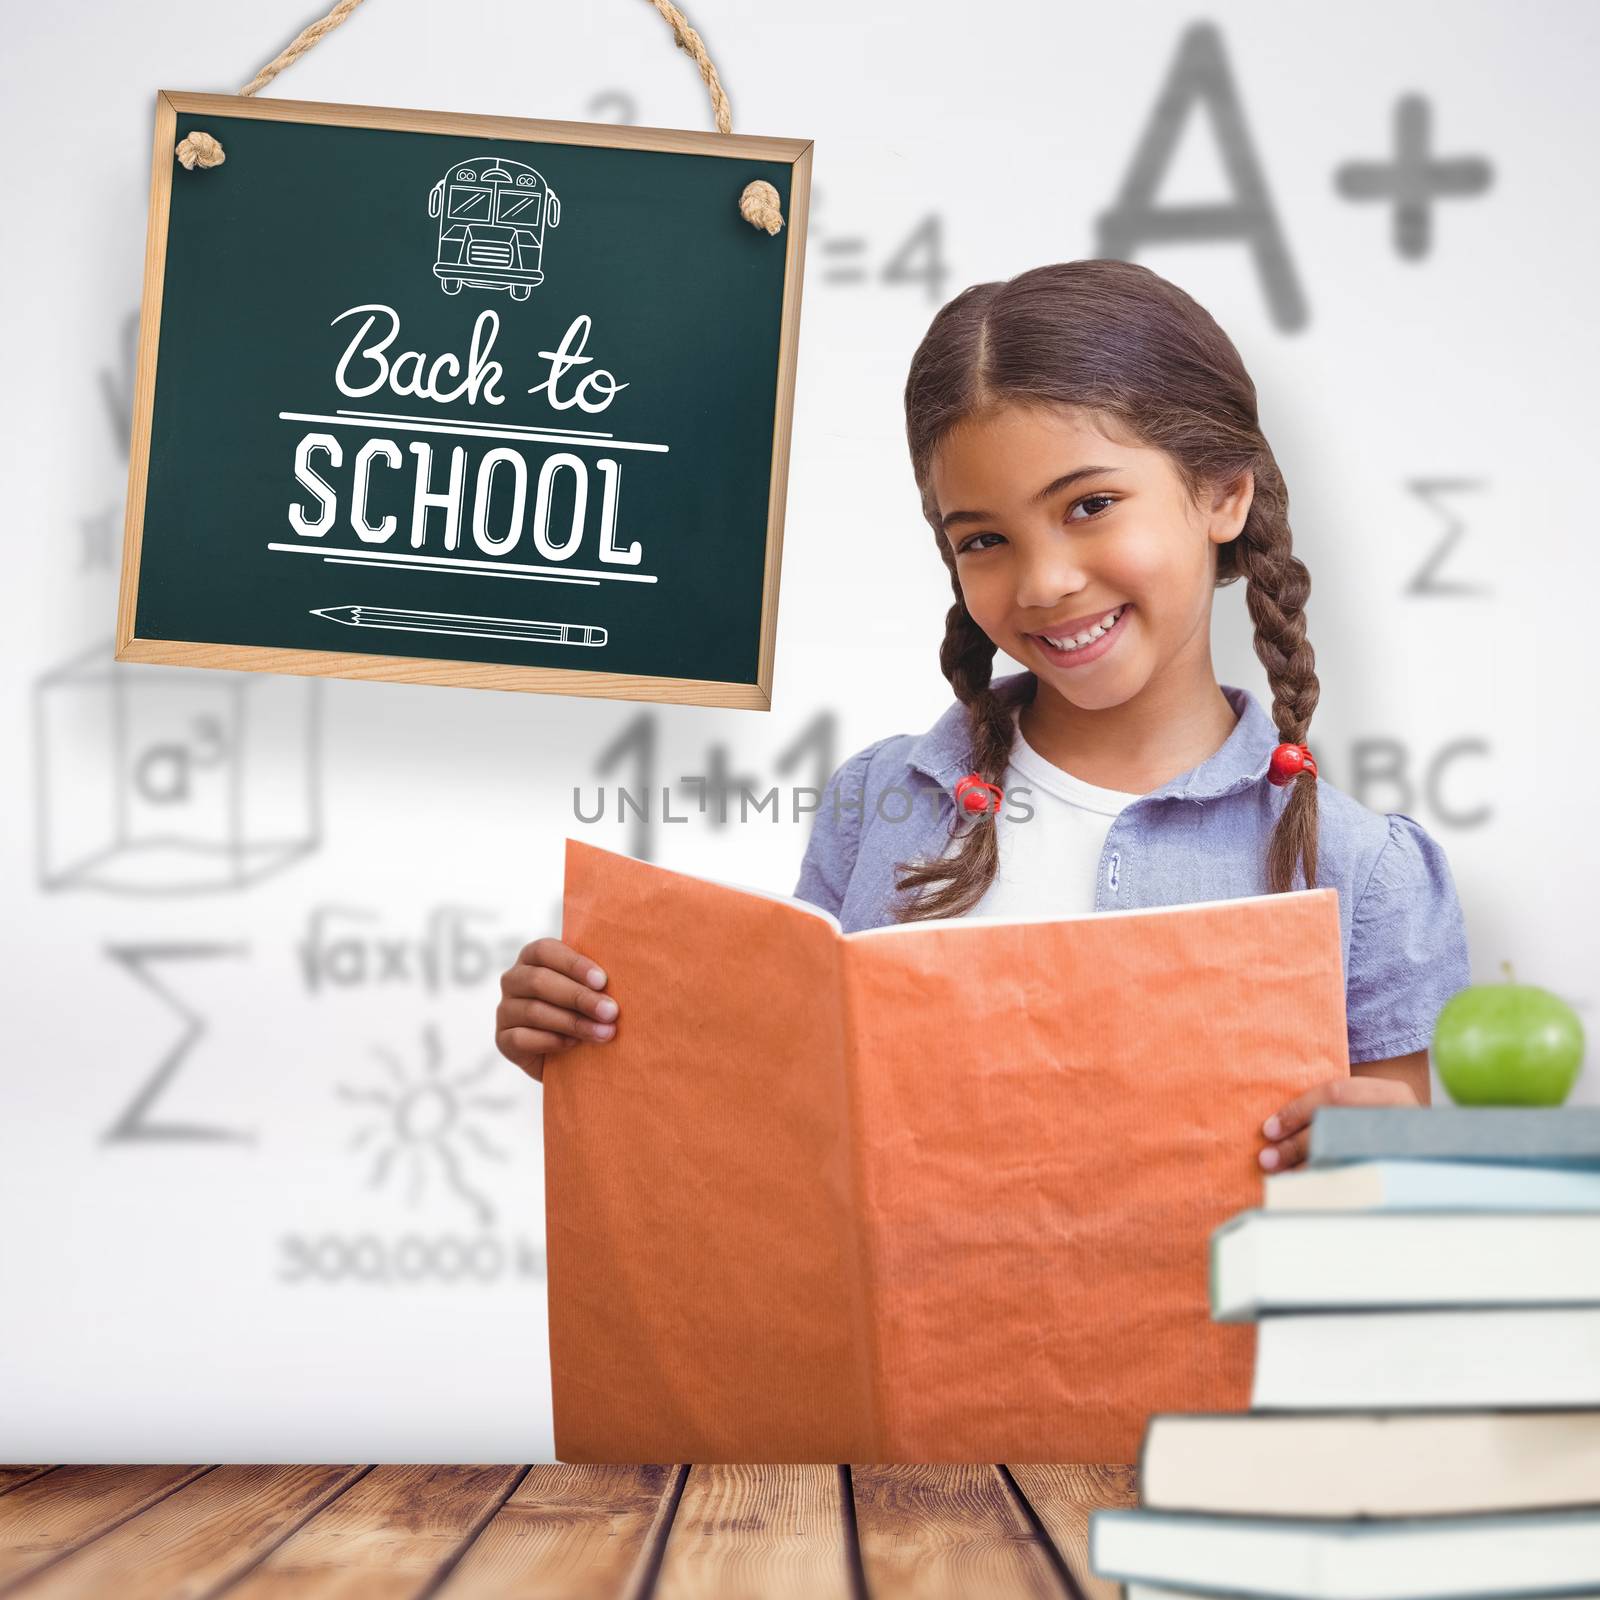 Cute pupil smiling at camera during class presentation against wooden planks background